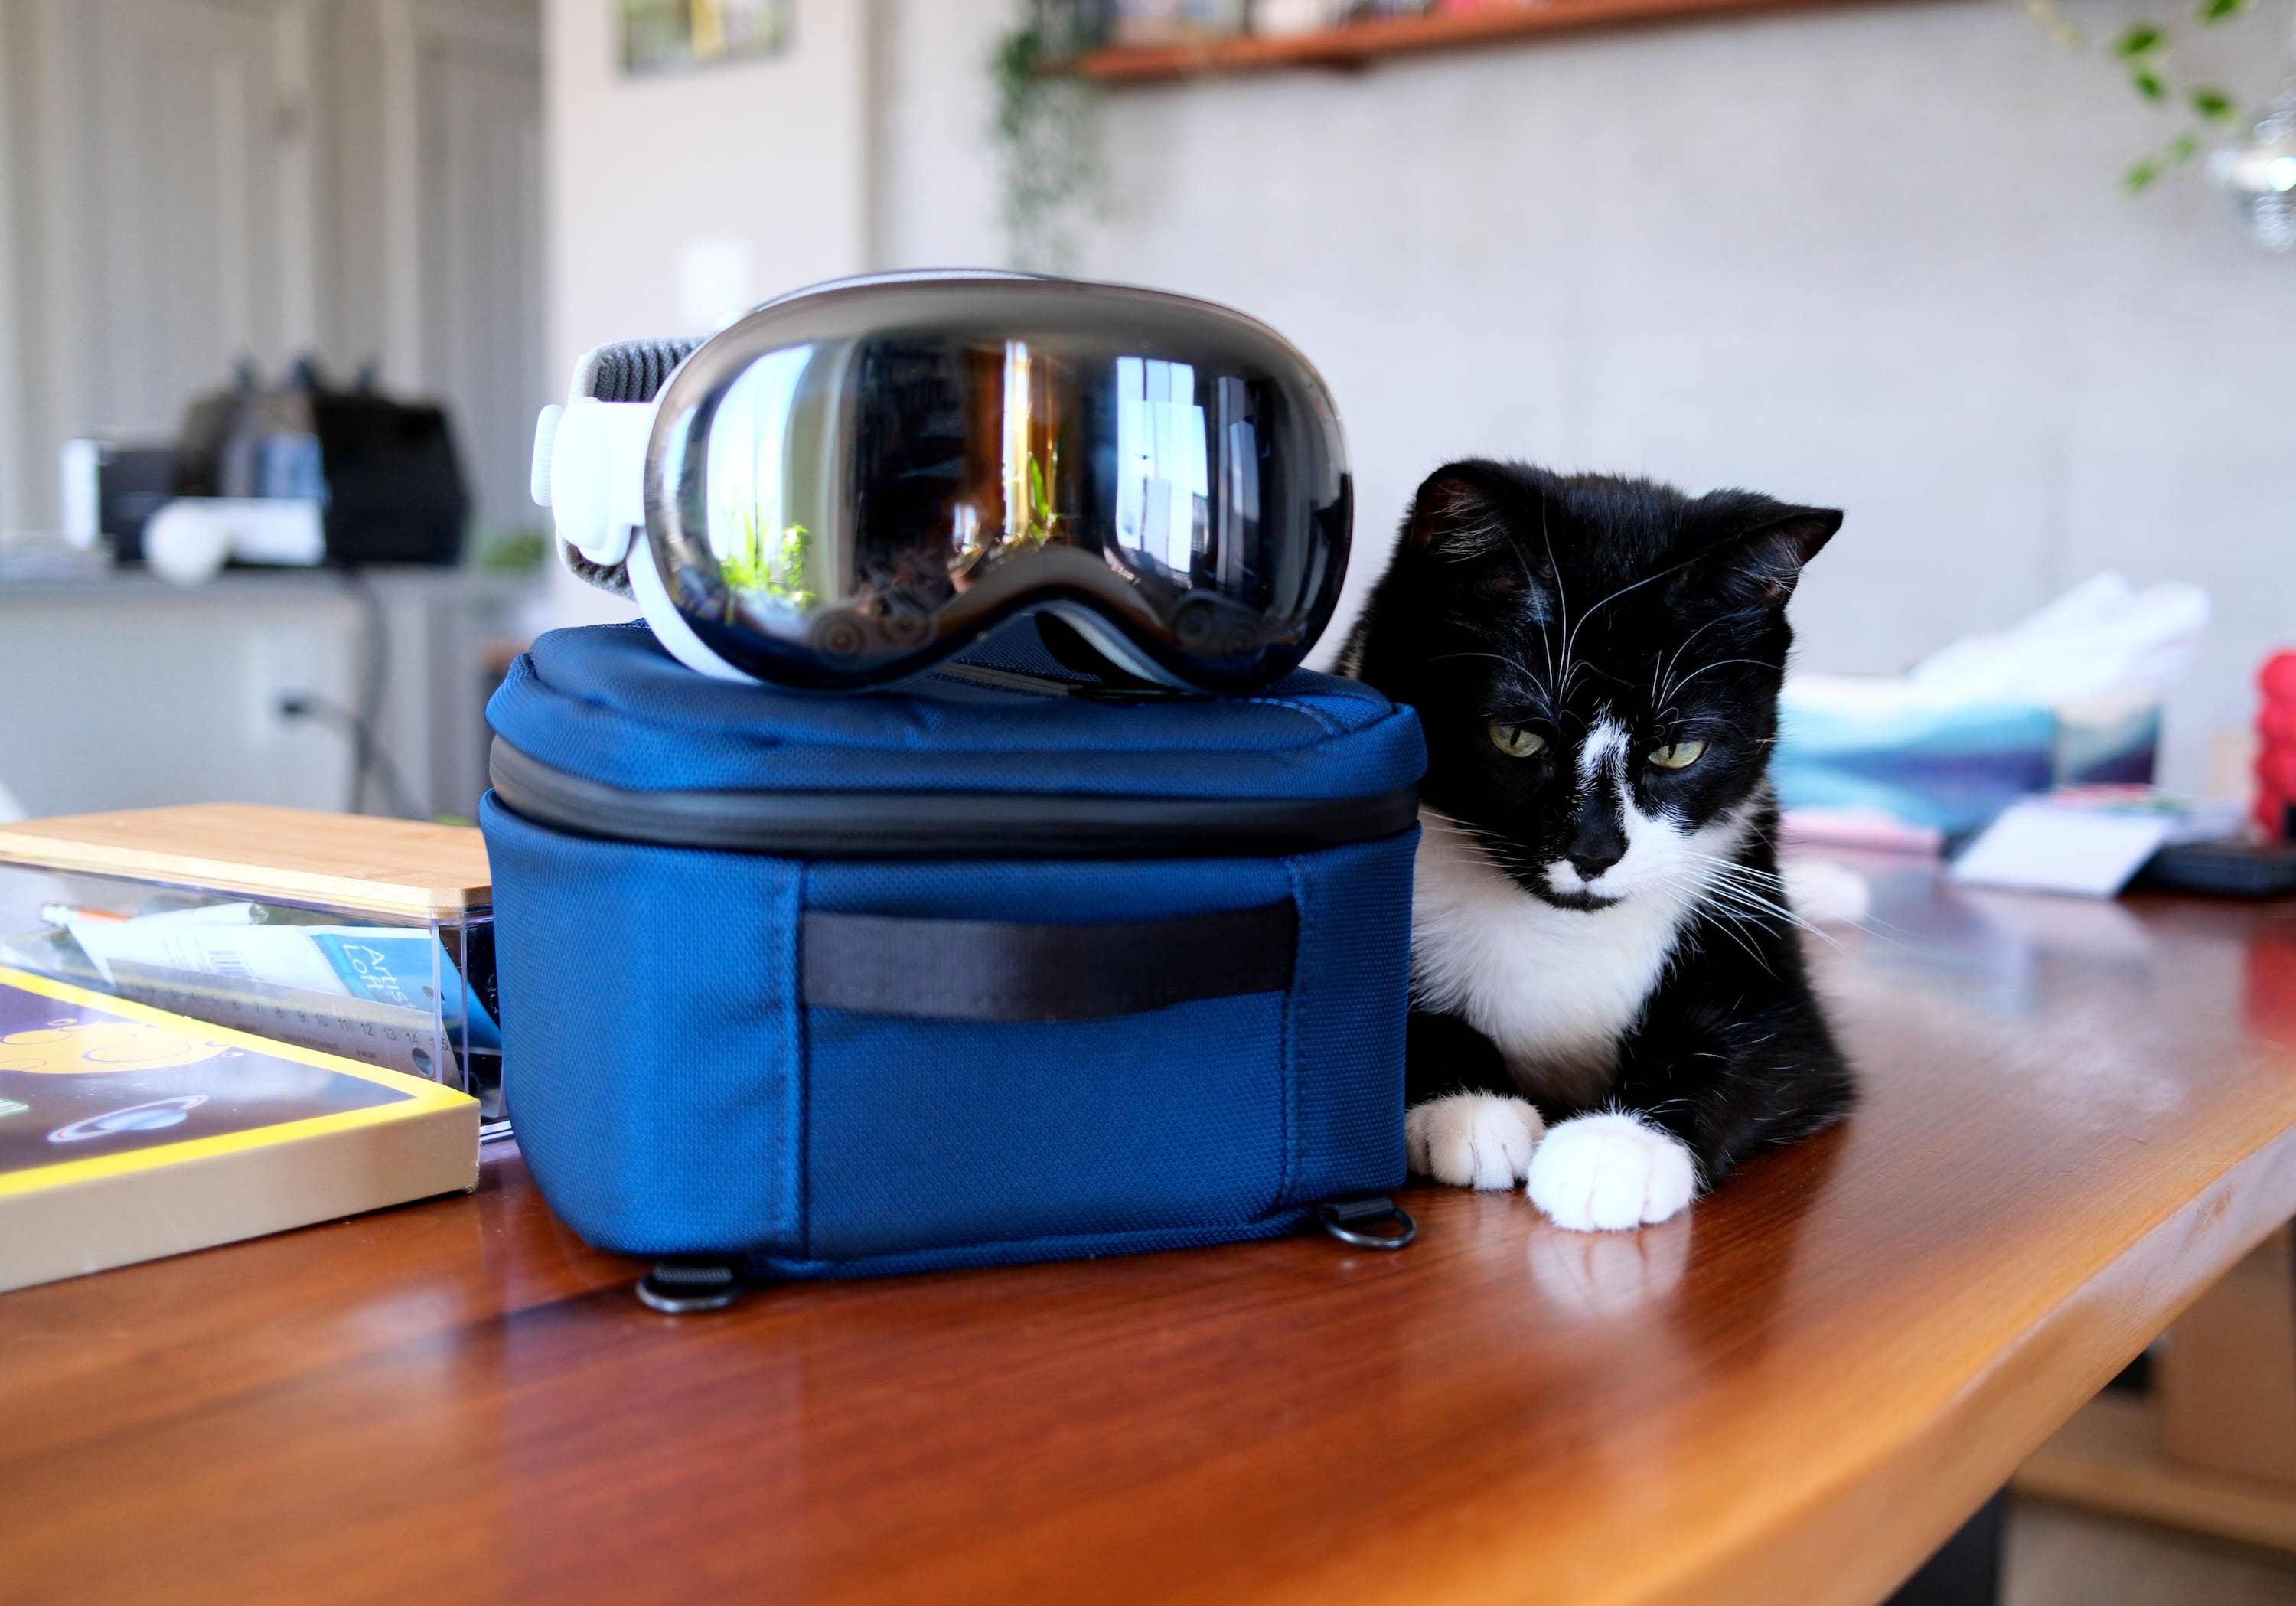 Vision Pro on top of a blue lunchbox style case for it, next to a black and white cat looking at its paws